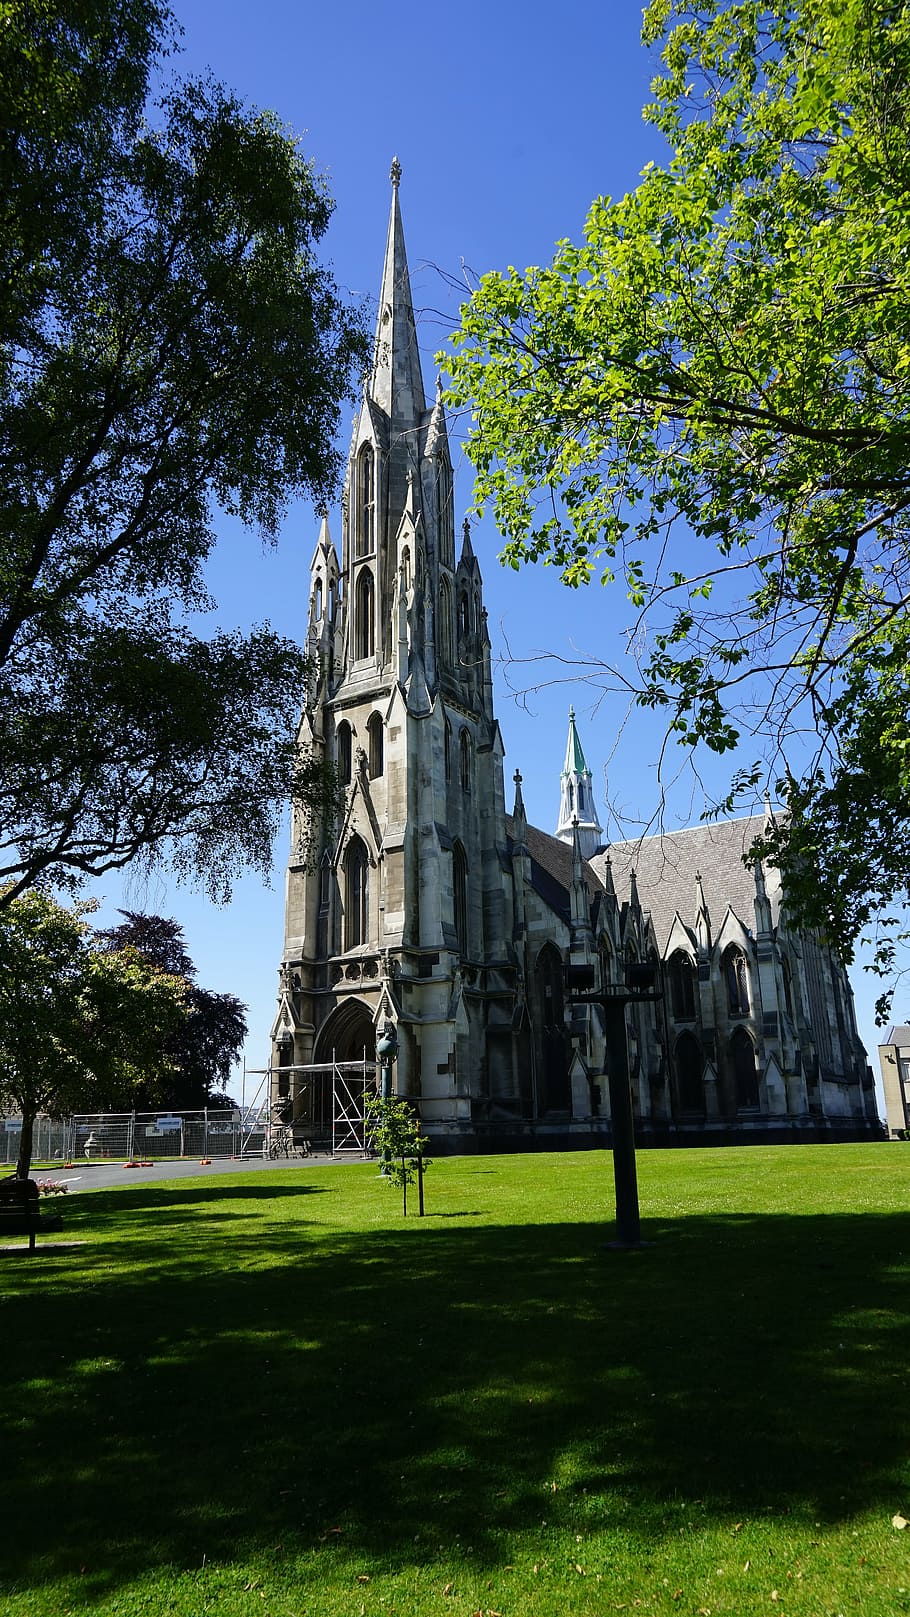 otago, new zealand, church, the first church of otago, plant, grass, tree, built structure, architecture, building exterior